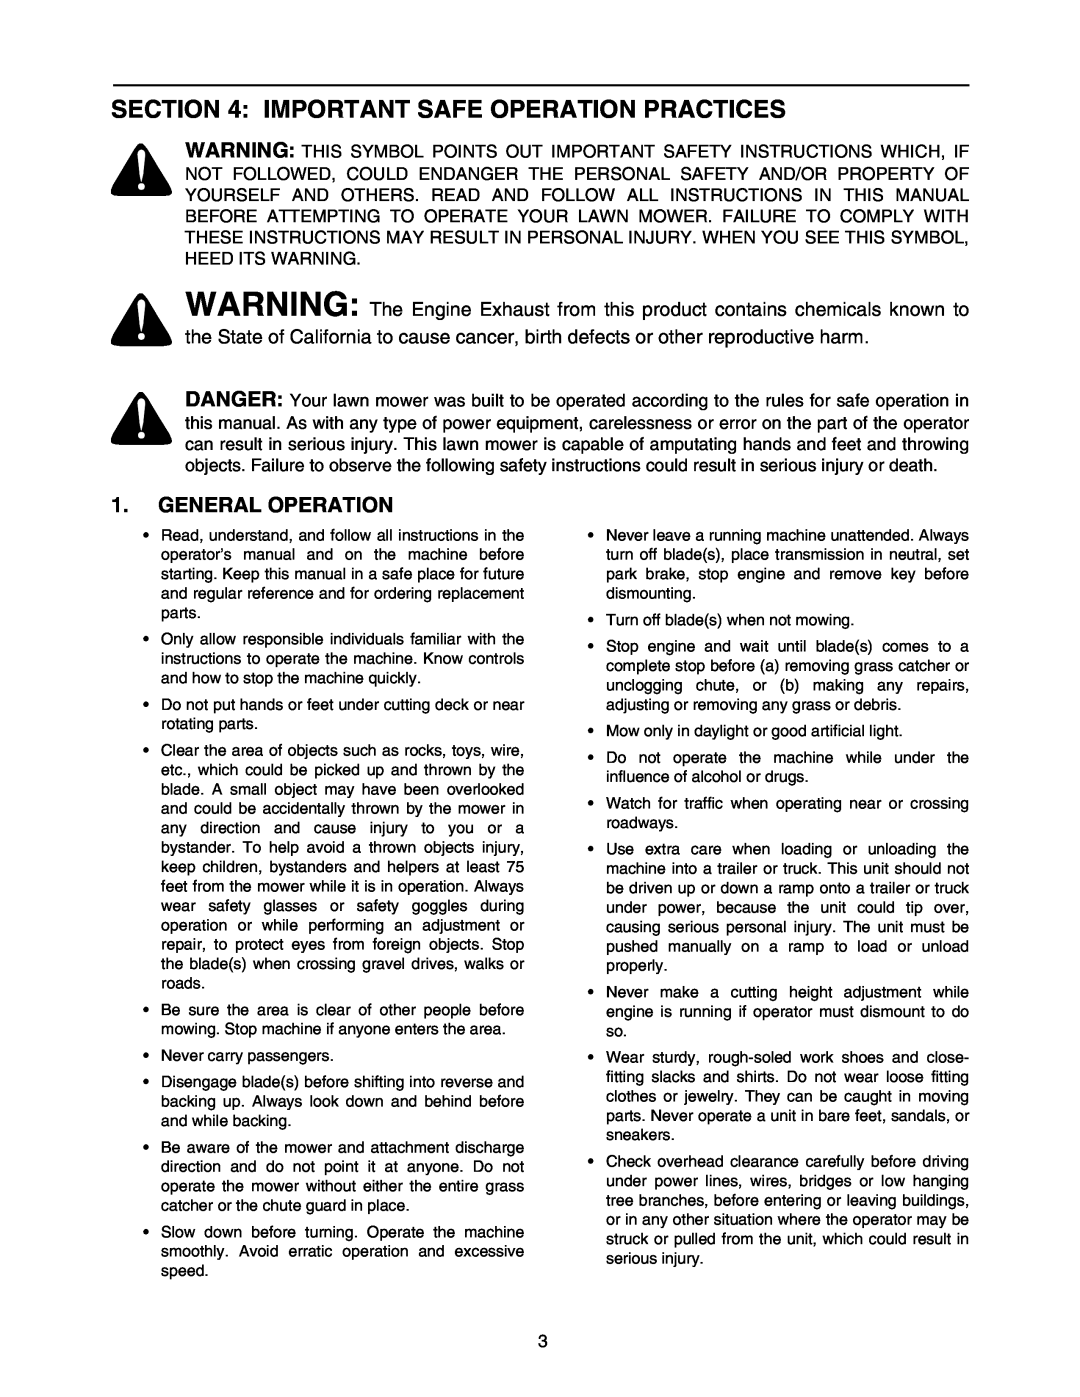 Yard-Man 604 manual Important Safe Operation Practices, General Operation 